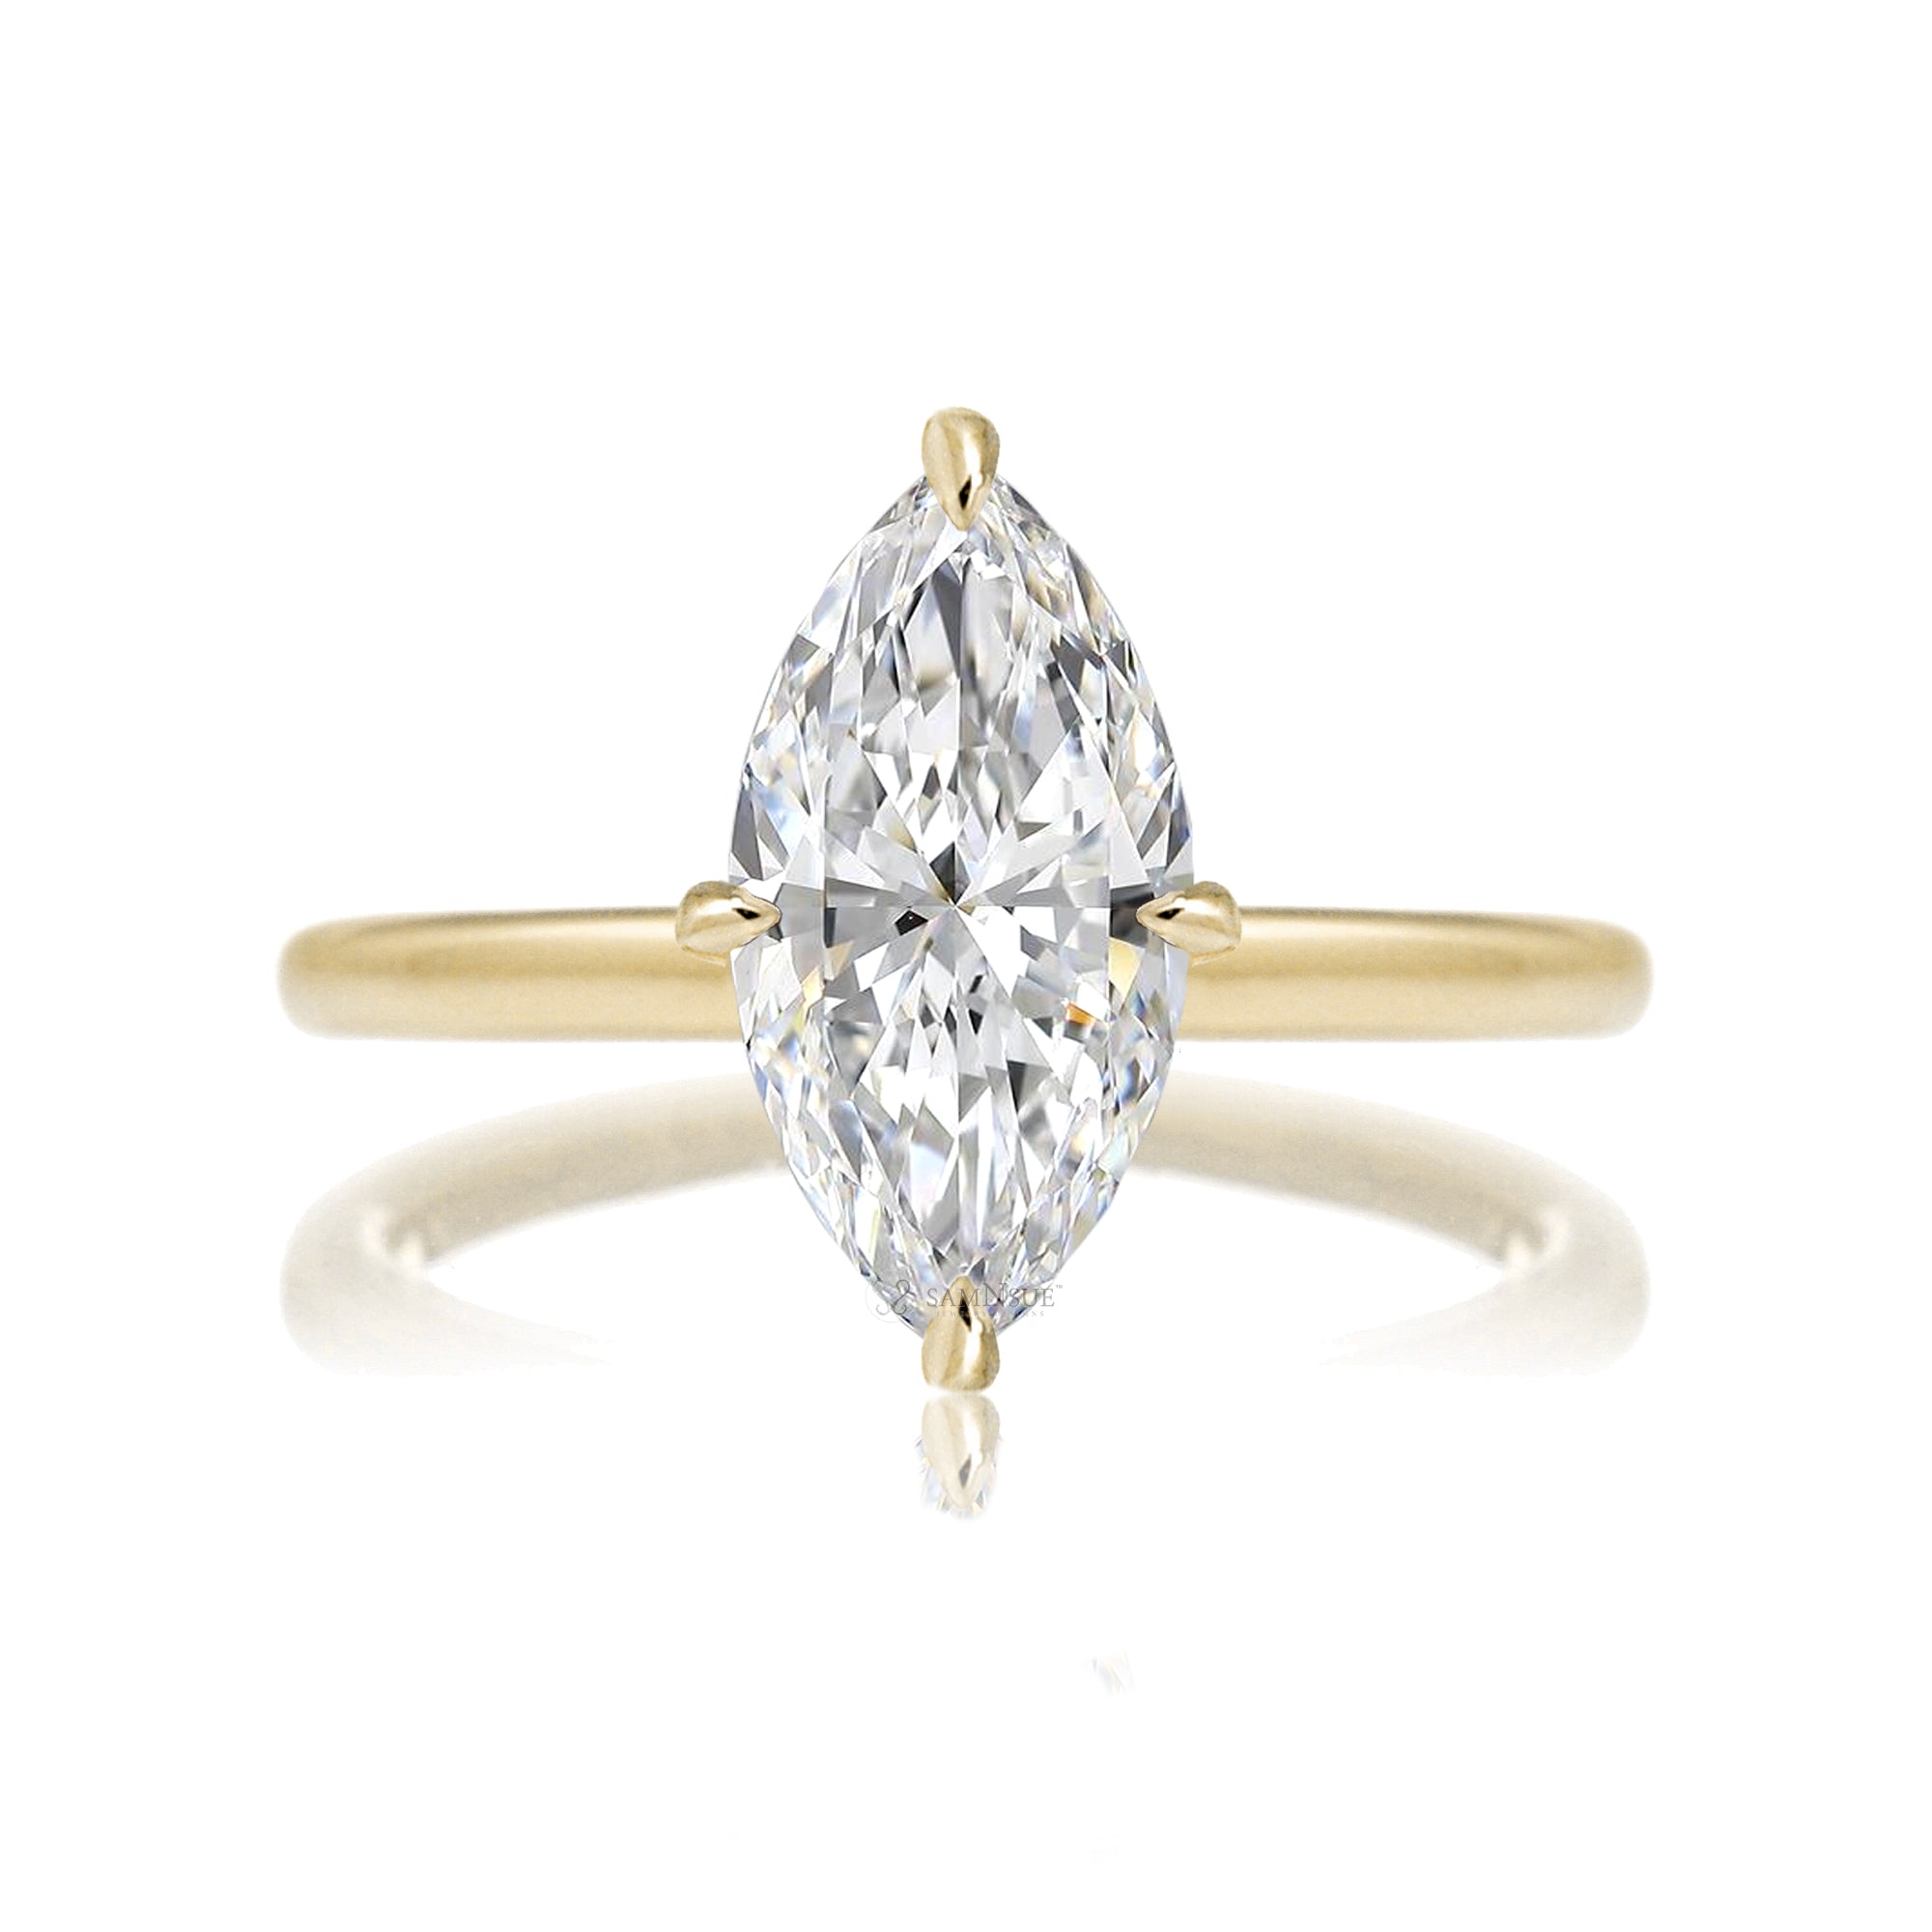 Marquise cut solitaire diamond engagement ring with a hidden halo and solid polished band in yellow gold